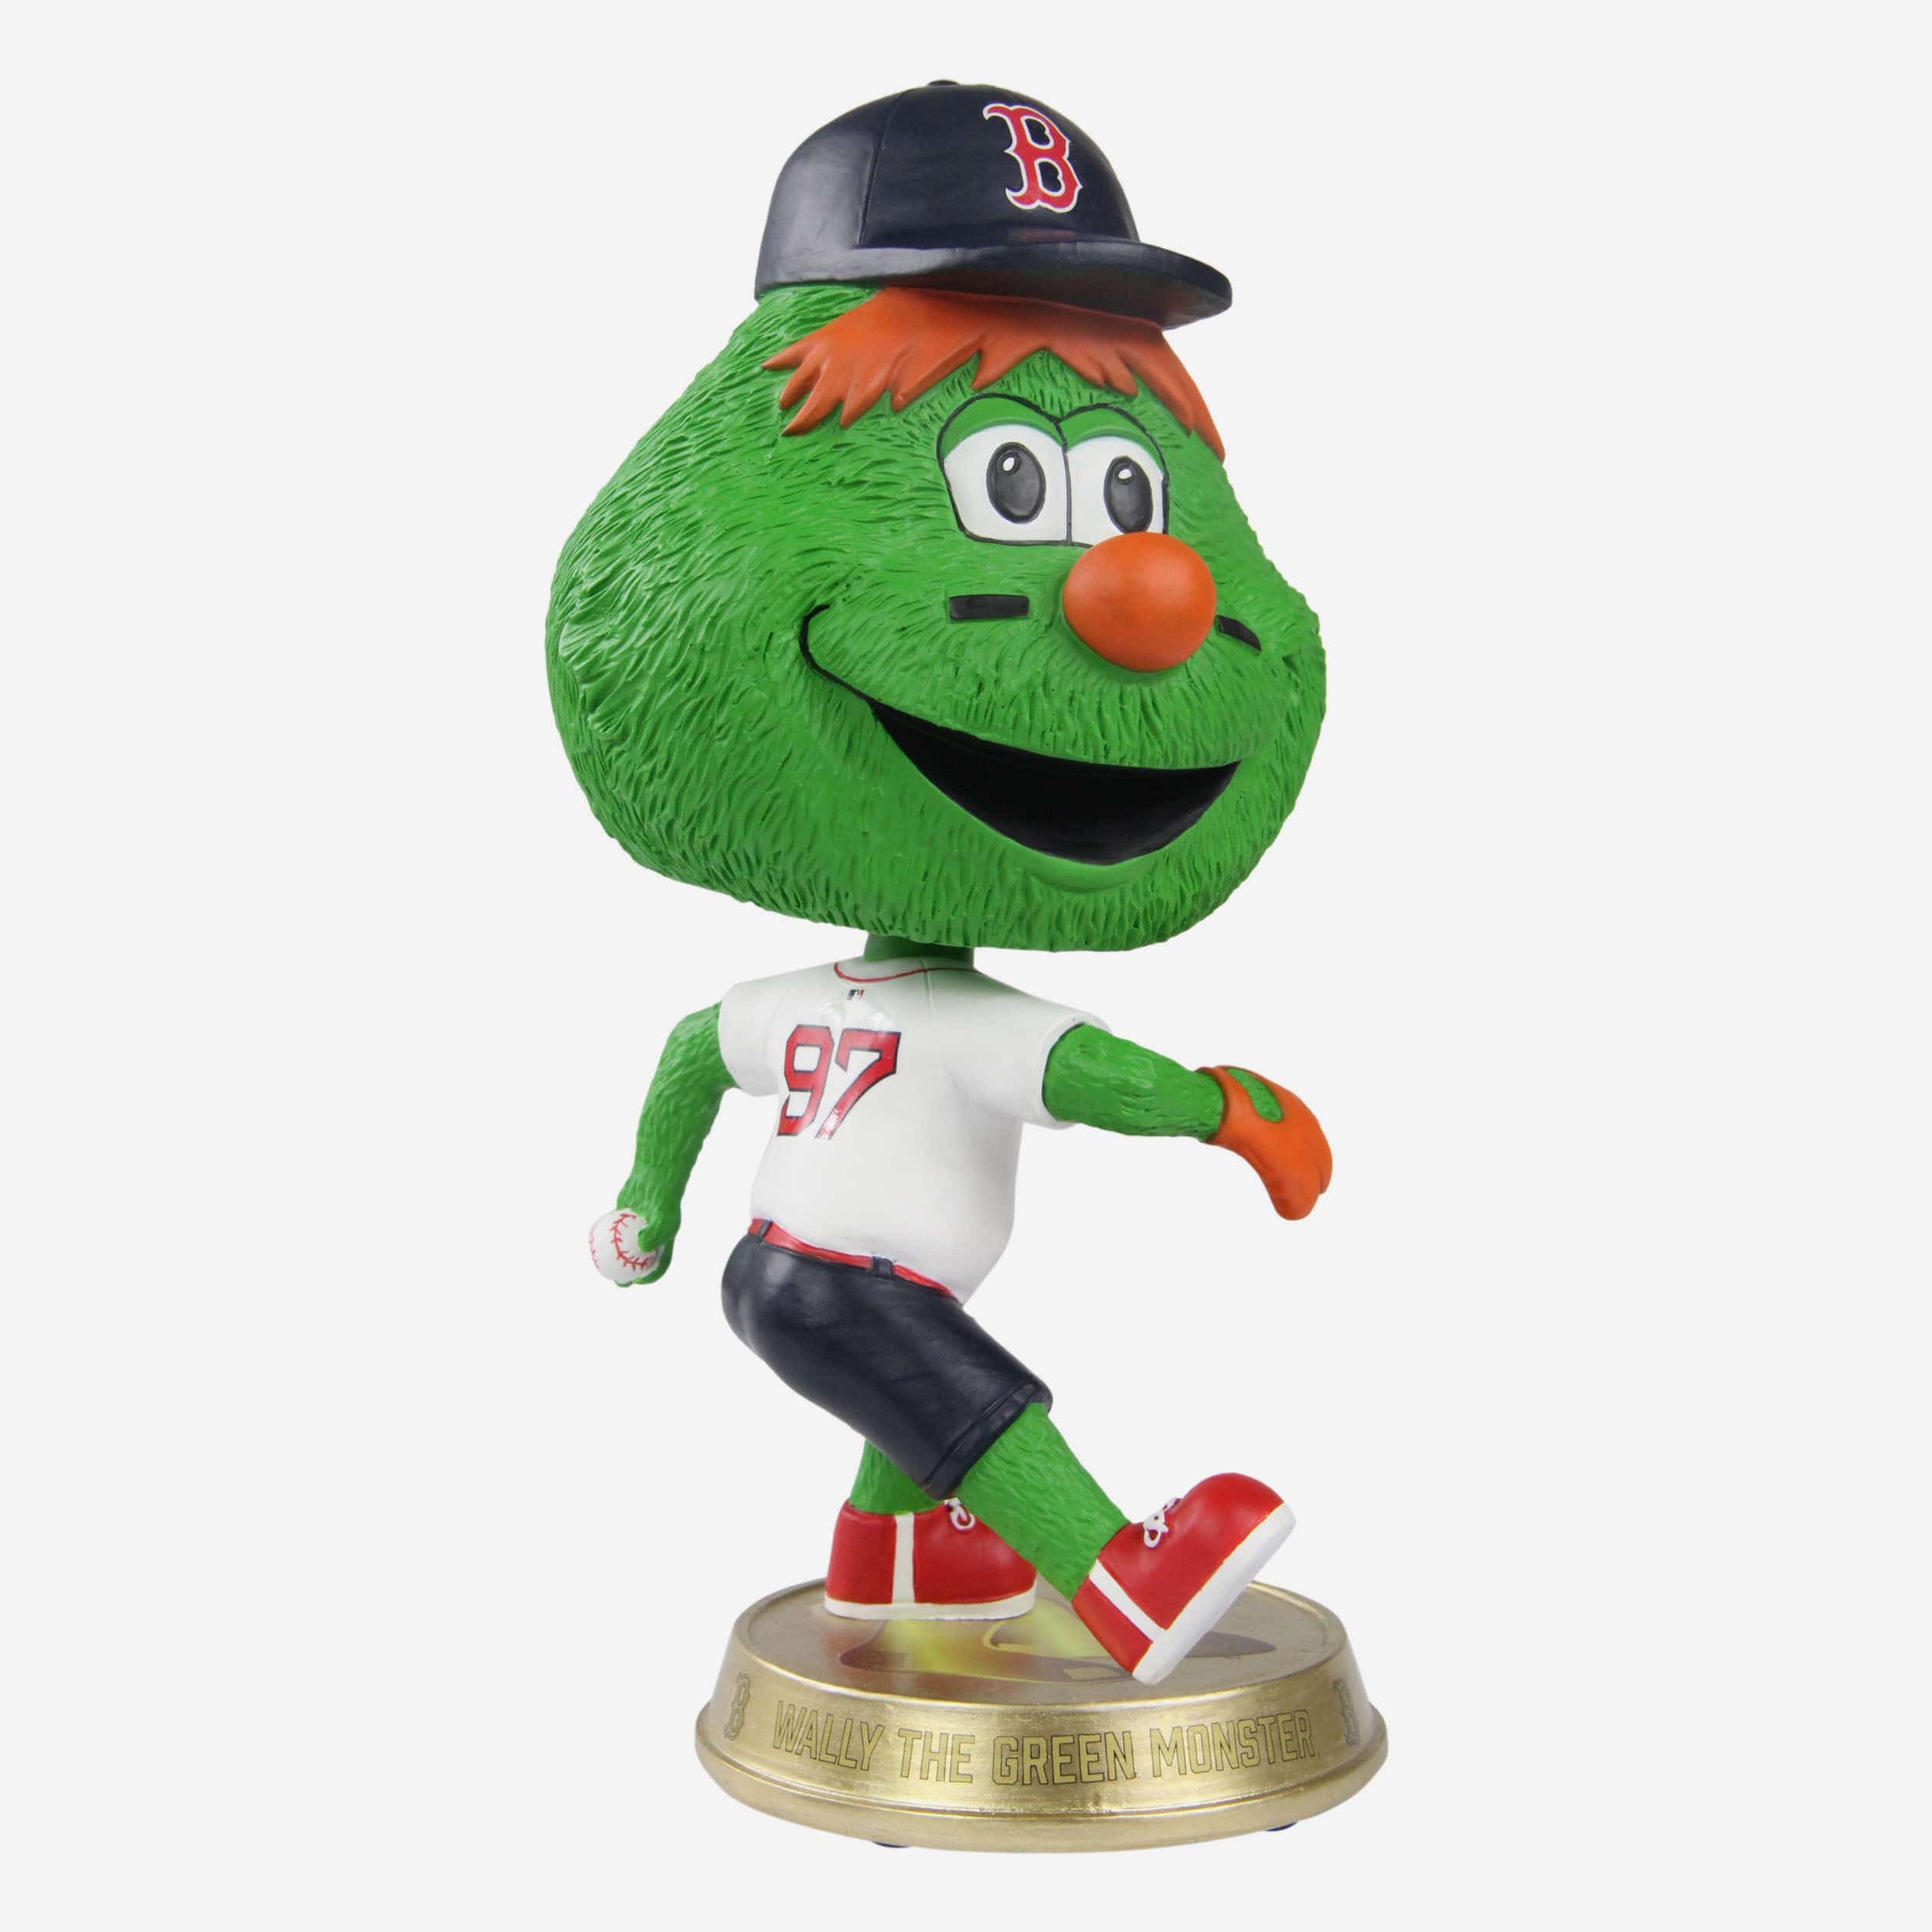 Wally the Green Monster  Green monsters, Boston red sox baseball